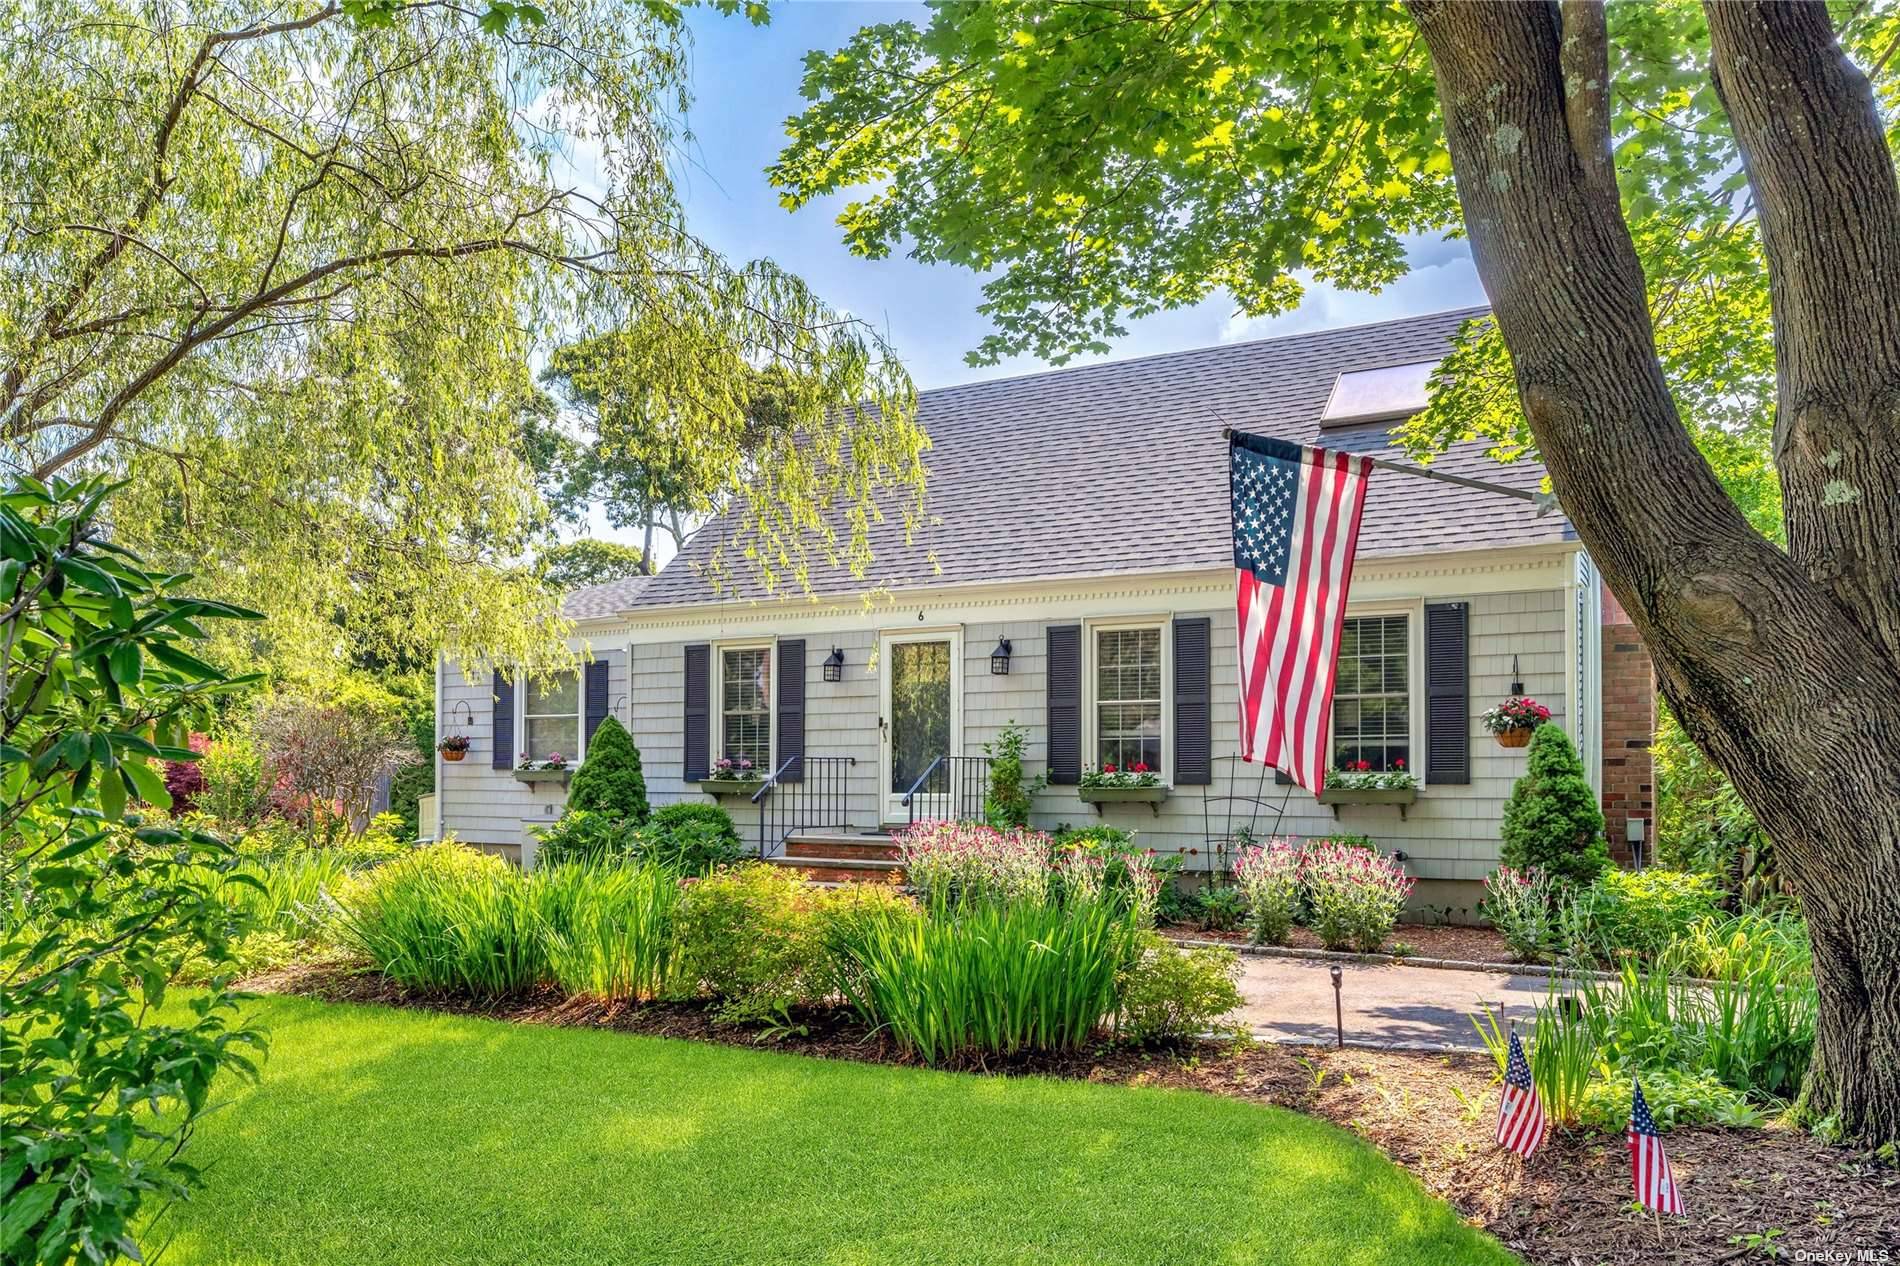 Spend your summer at this generous cape cod home with endless character located south of Montauk Highway in Remsenburg.